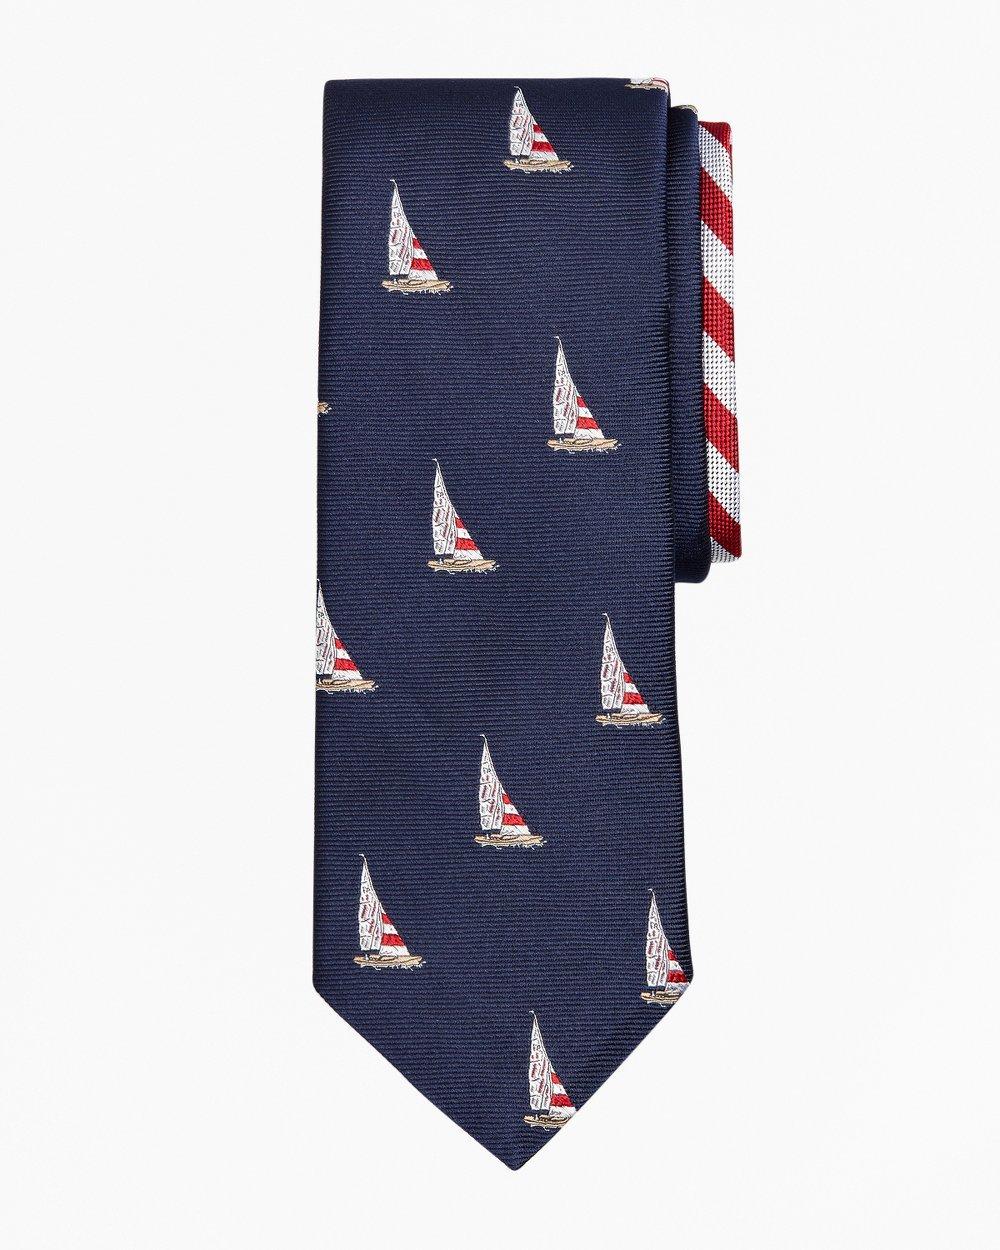 Sailboat and Stripe Tie, image 1